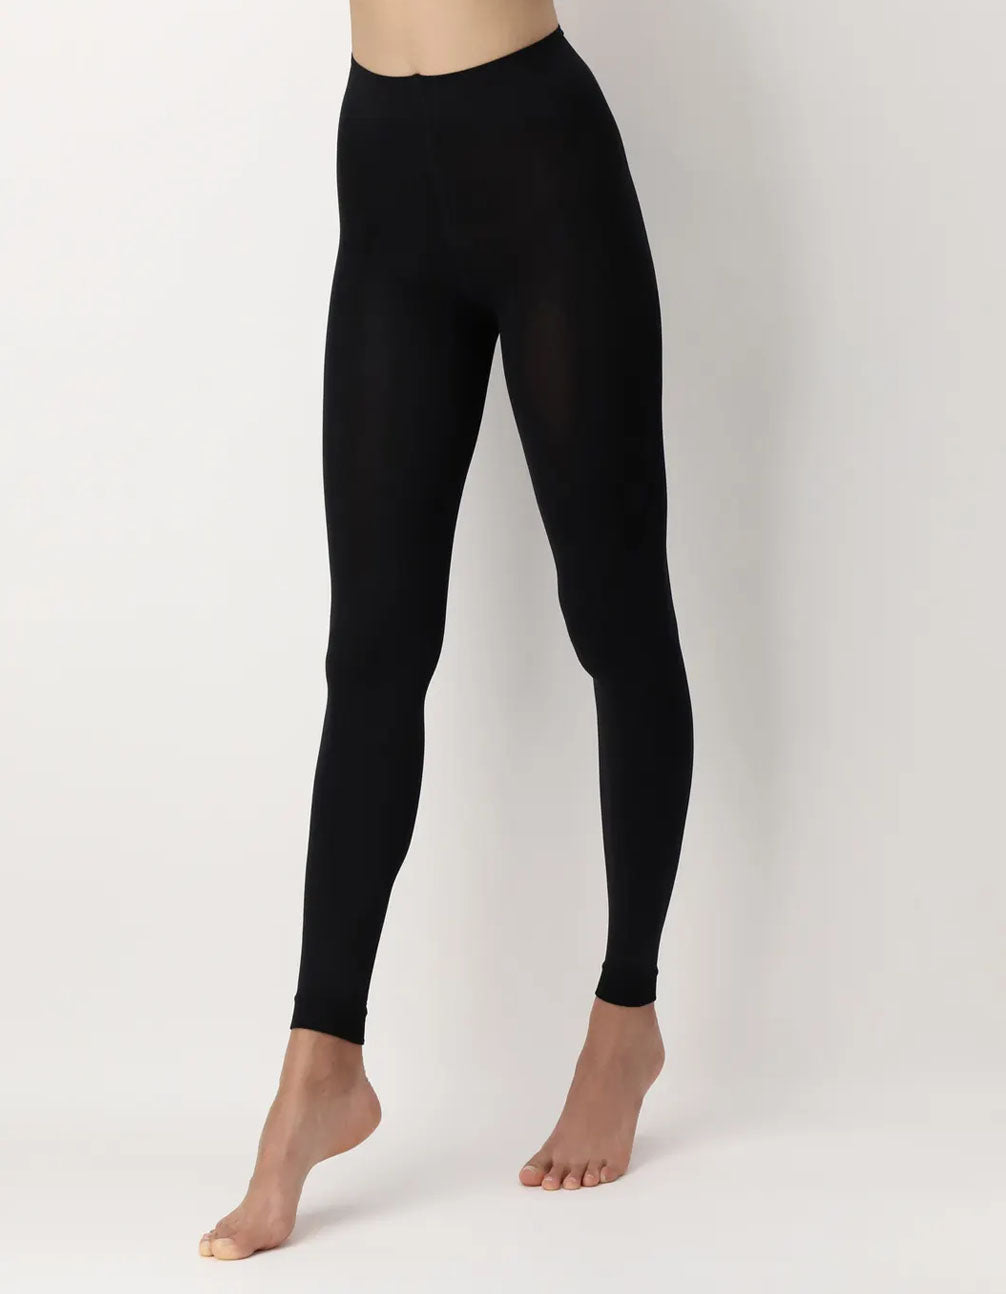 Oroblù All Colors 120 Leggings - Black ultra opaque soft matte footless tights with flat seams, gusset and deep waist band.